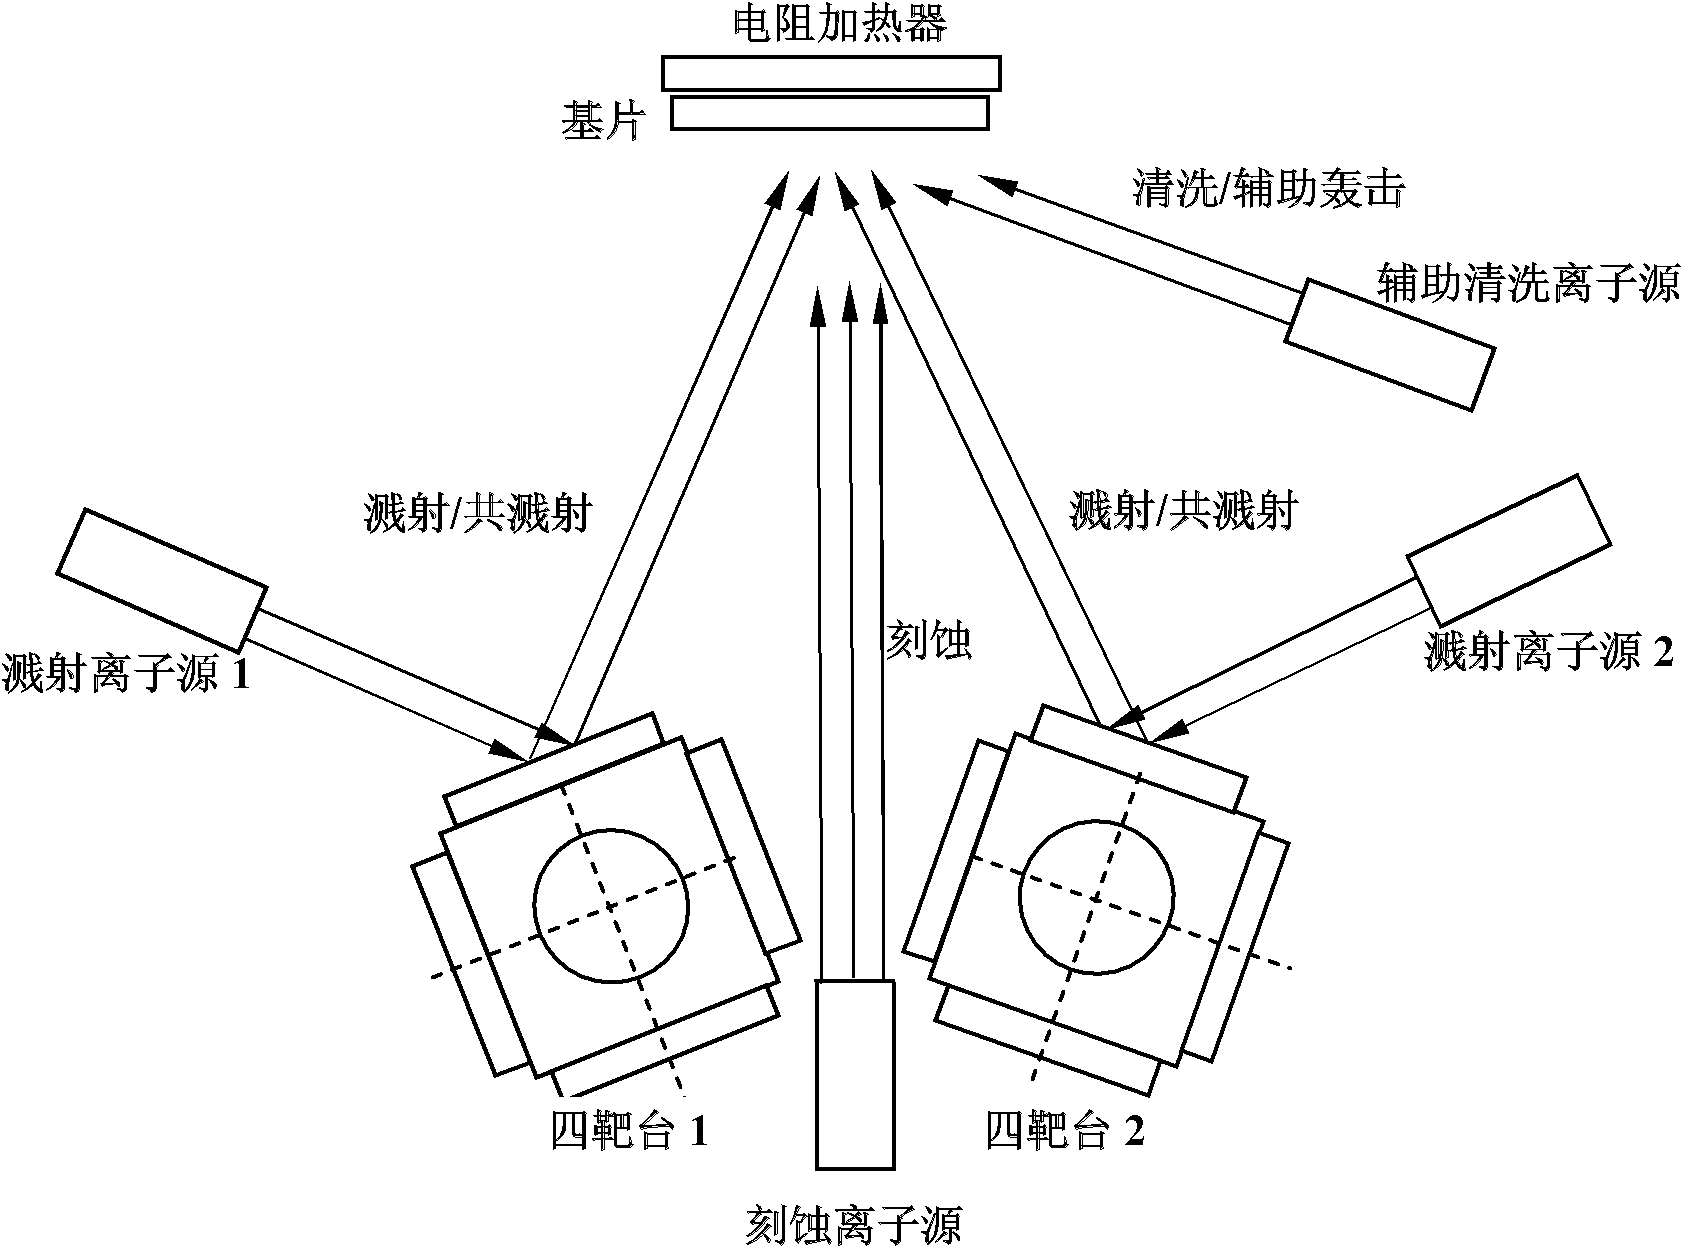 Multifunctional ion beam sputtering and etching and in-situ physical property analysis system